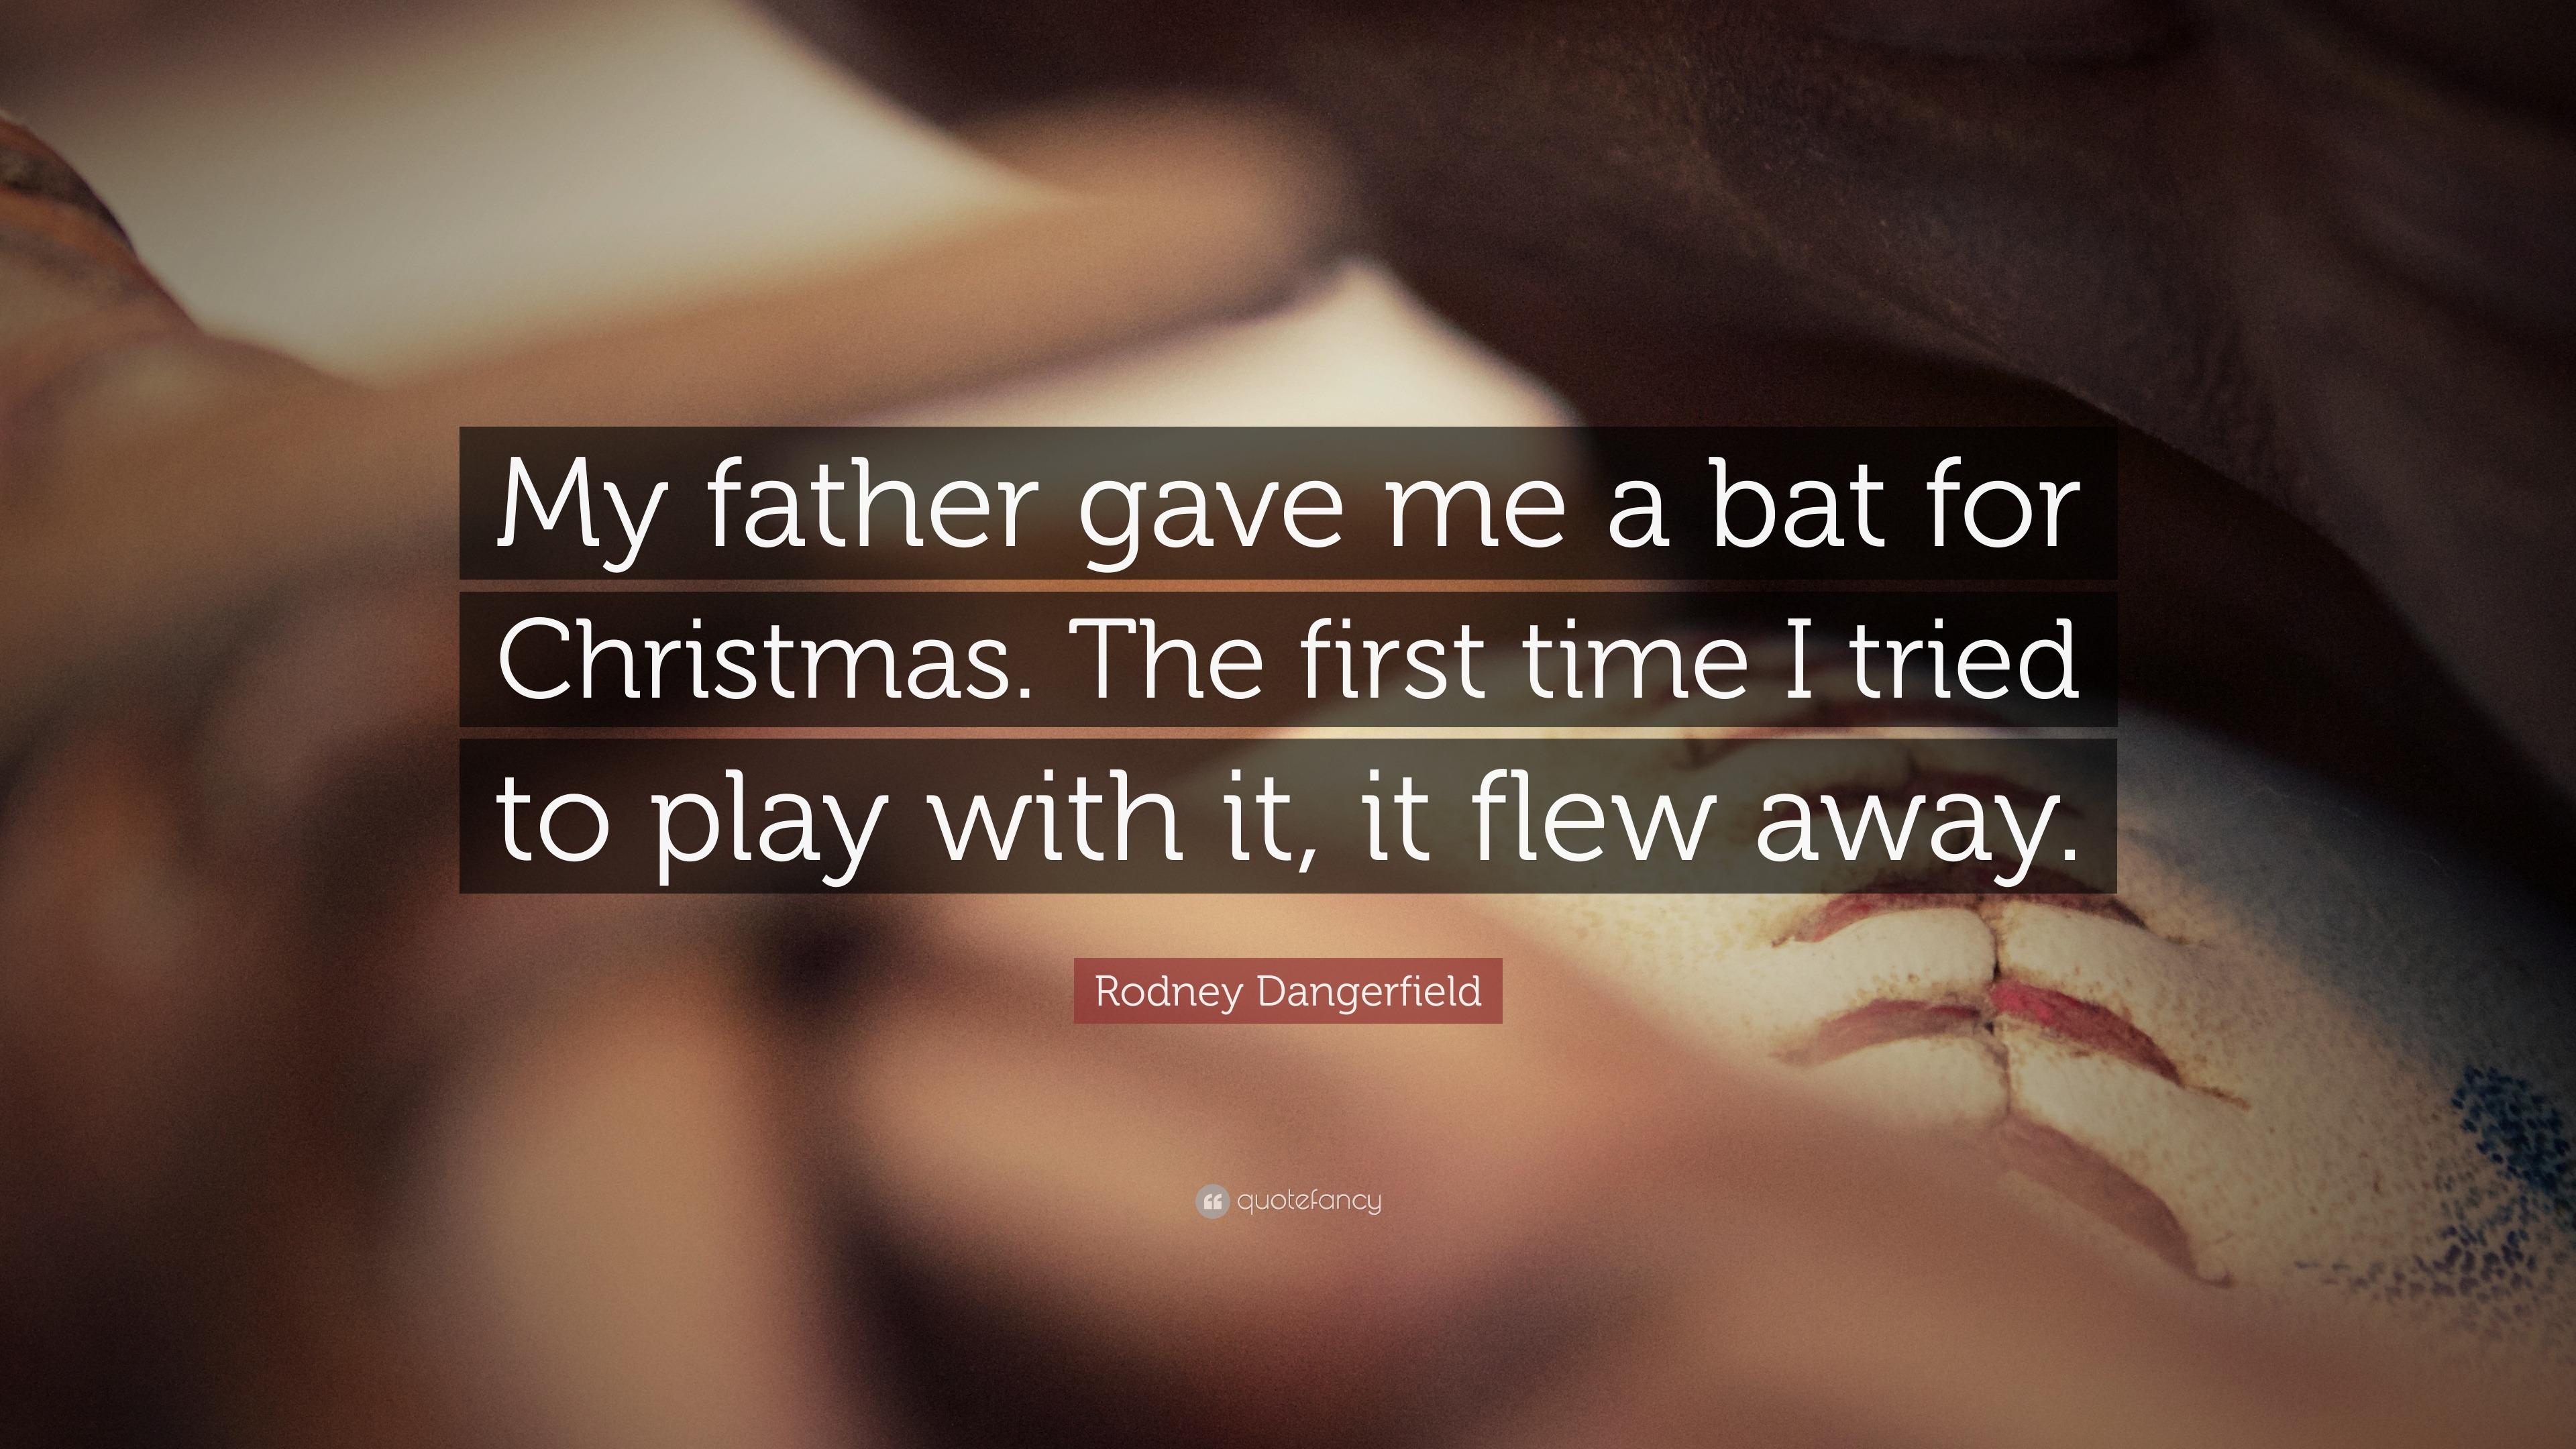 Rodney Dangerfield Quote: "My father gave me a bat for Chris